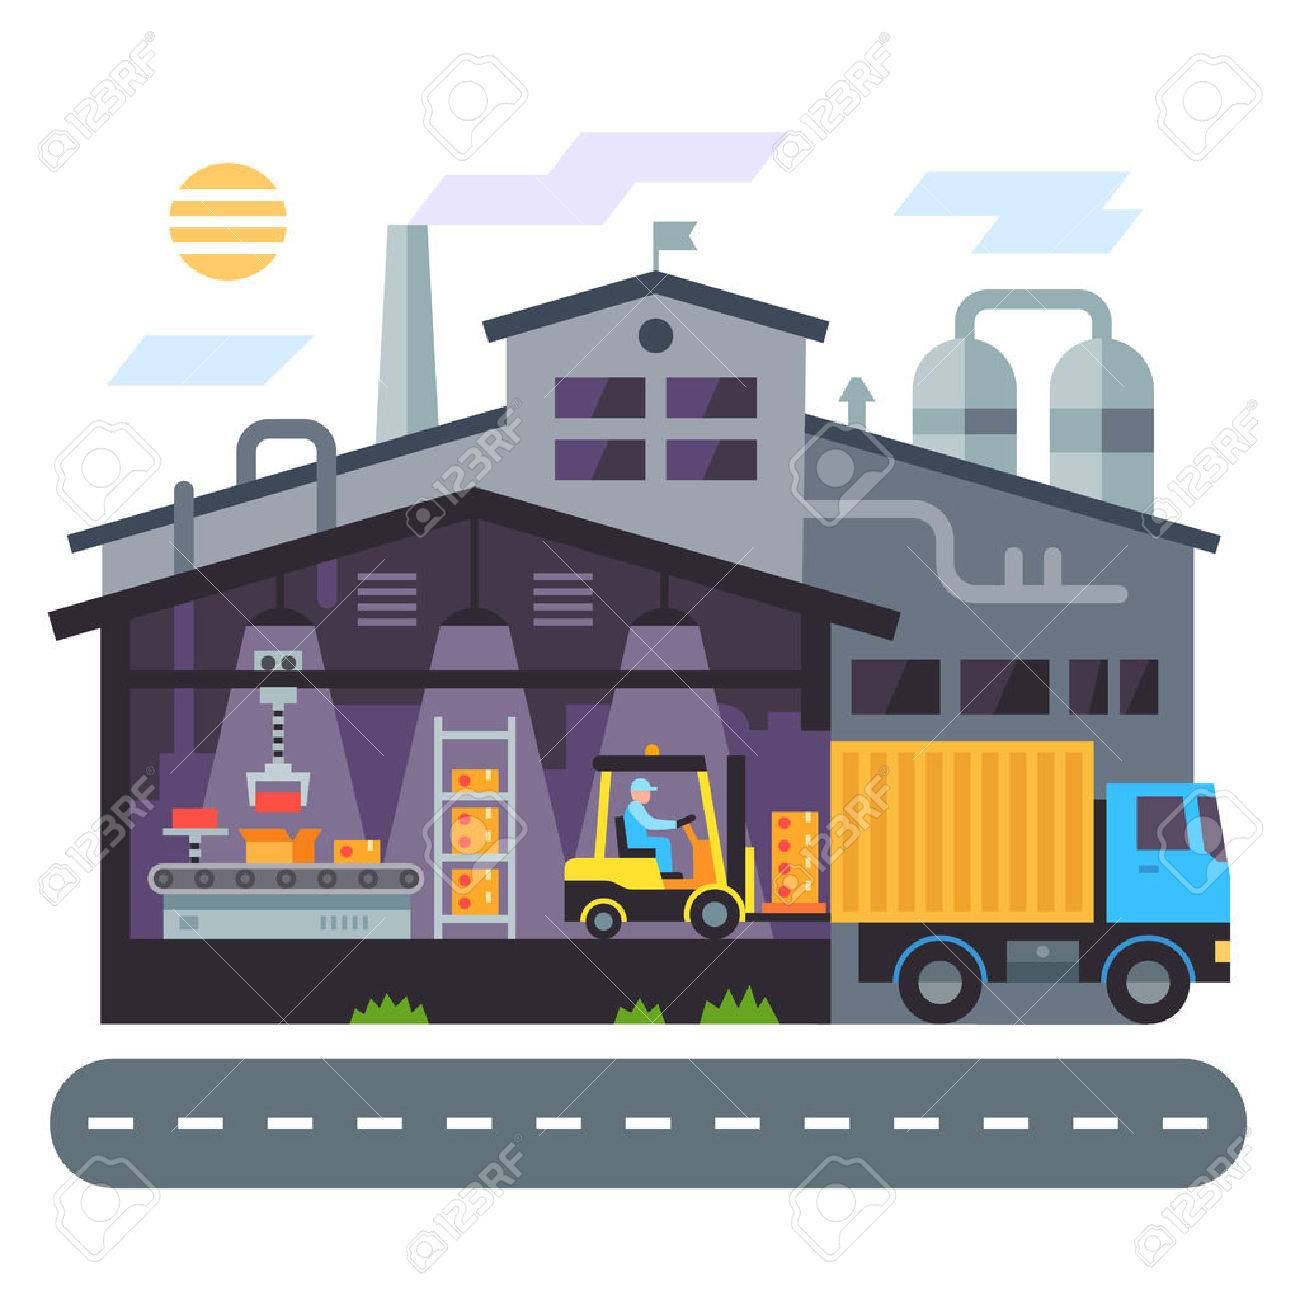 Free Warehouse Clipart factory production, Download Free